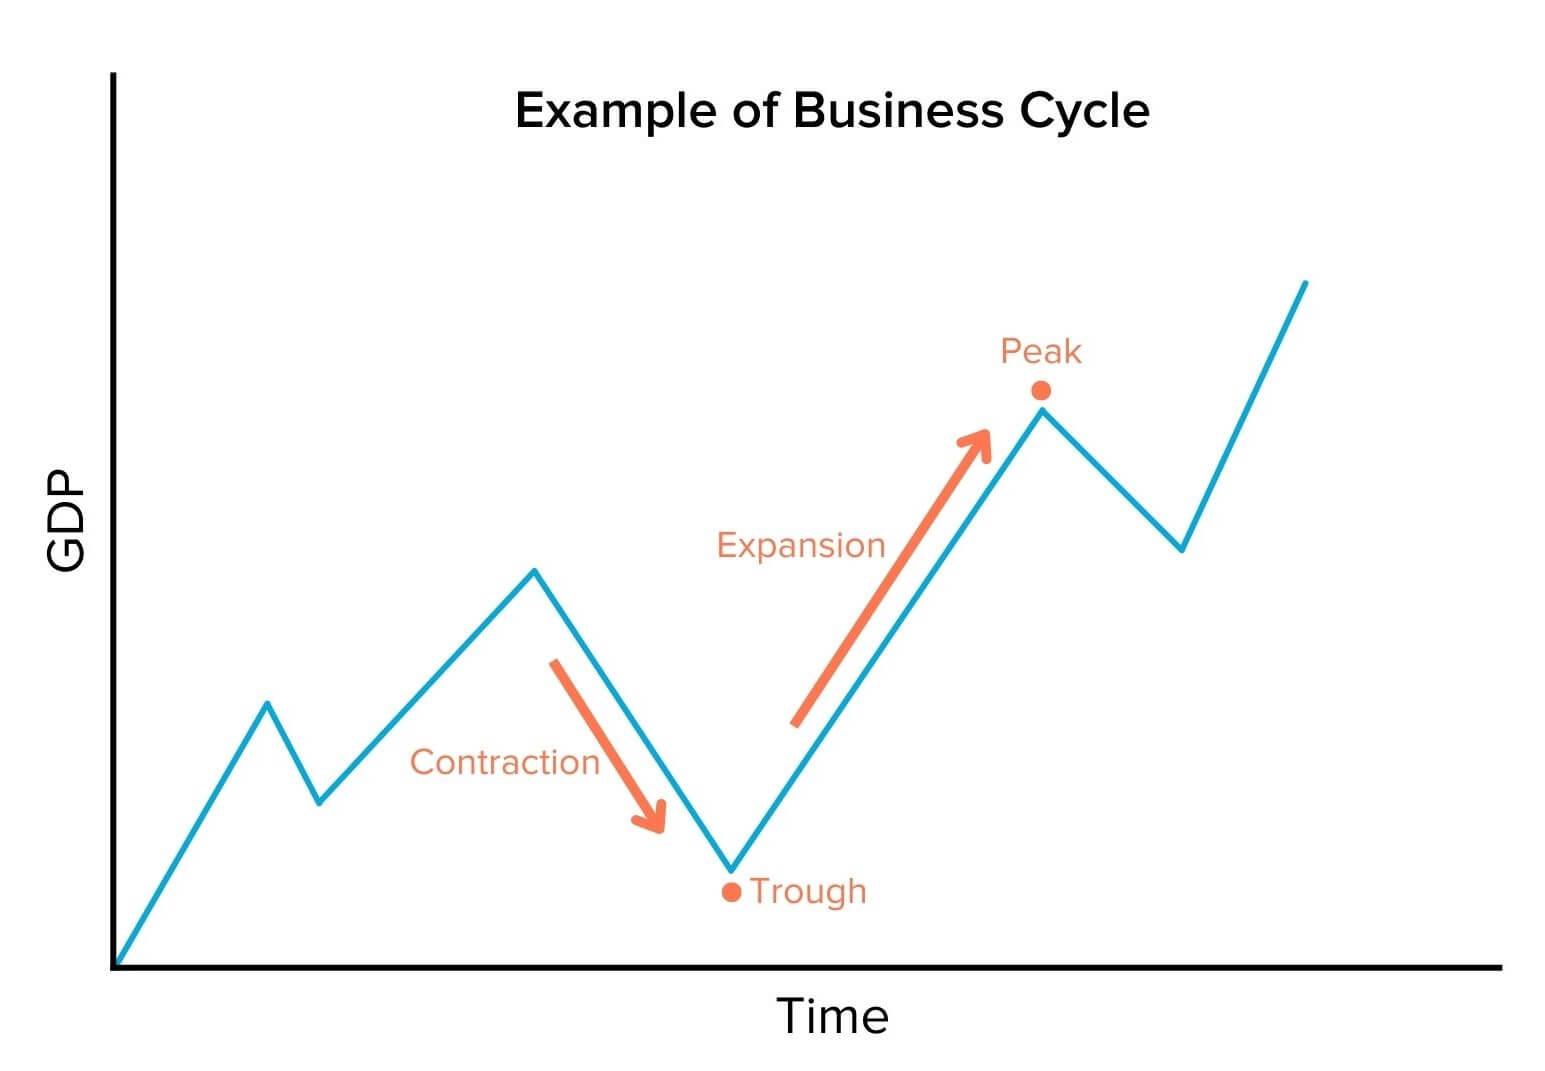 Example of business cycle showing the contraction, trough, expansion, and peak of a business